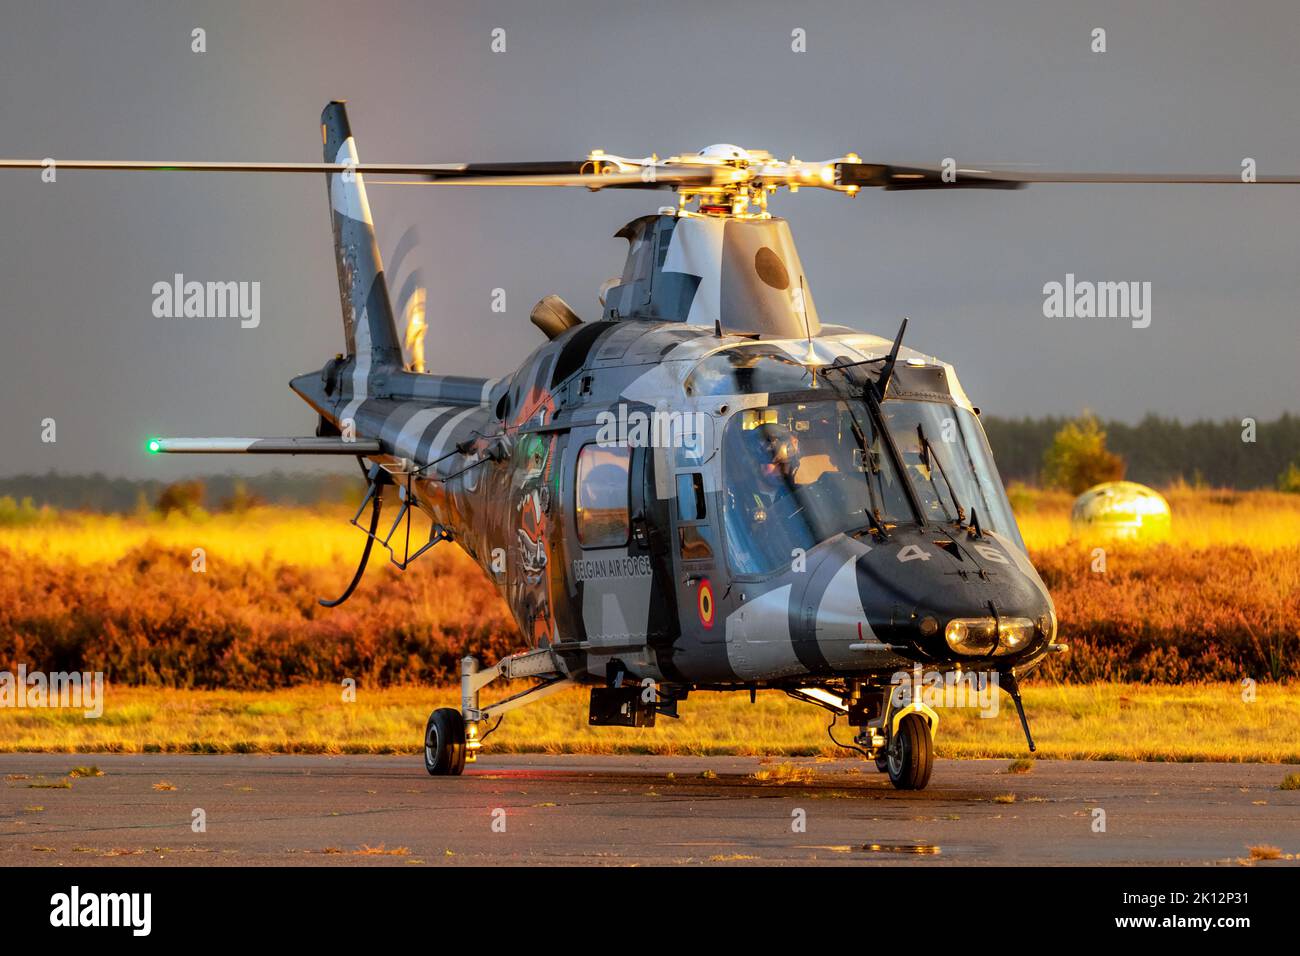 Belgian Air Force Agusta A109 helicopter about to perform during the Sanicole Sunset Airshow. Belgium - September 10, 2022 Stock Photo